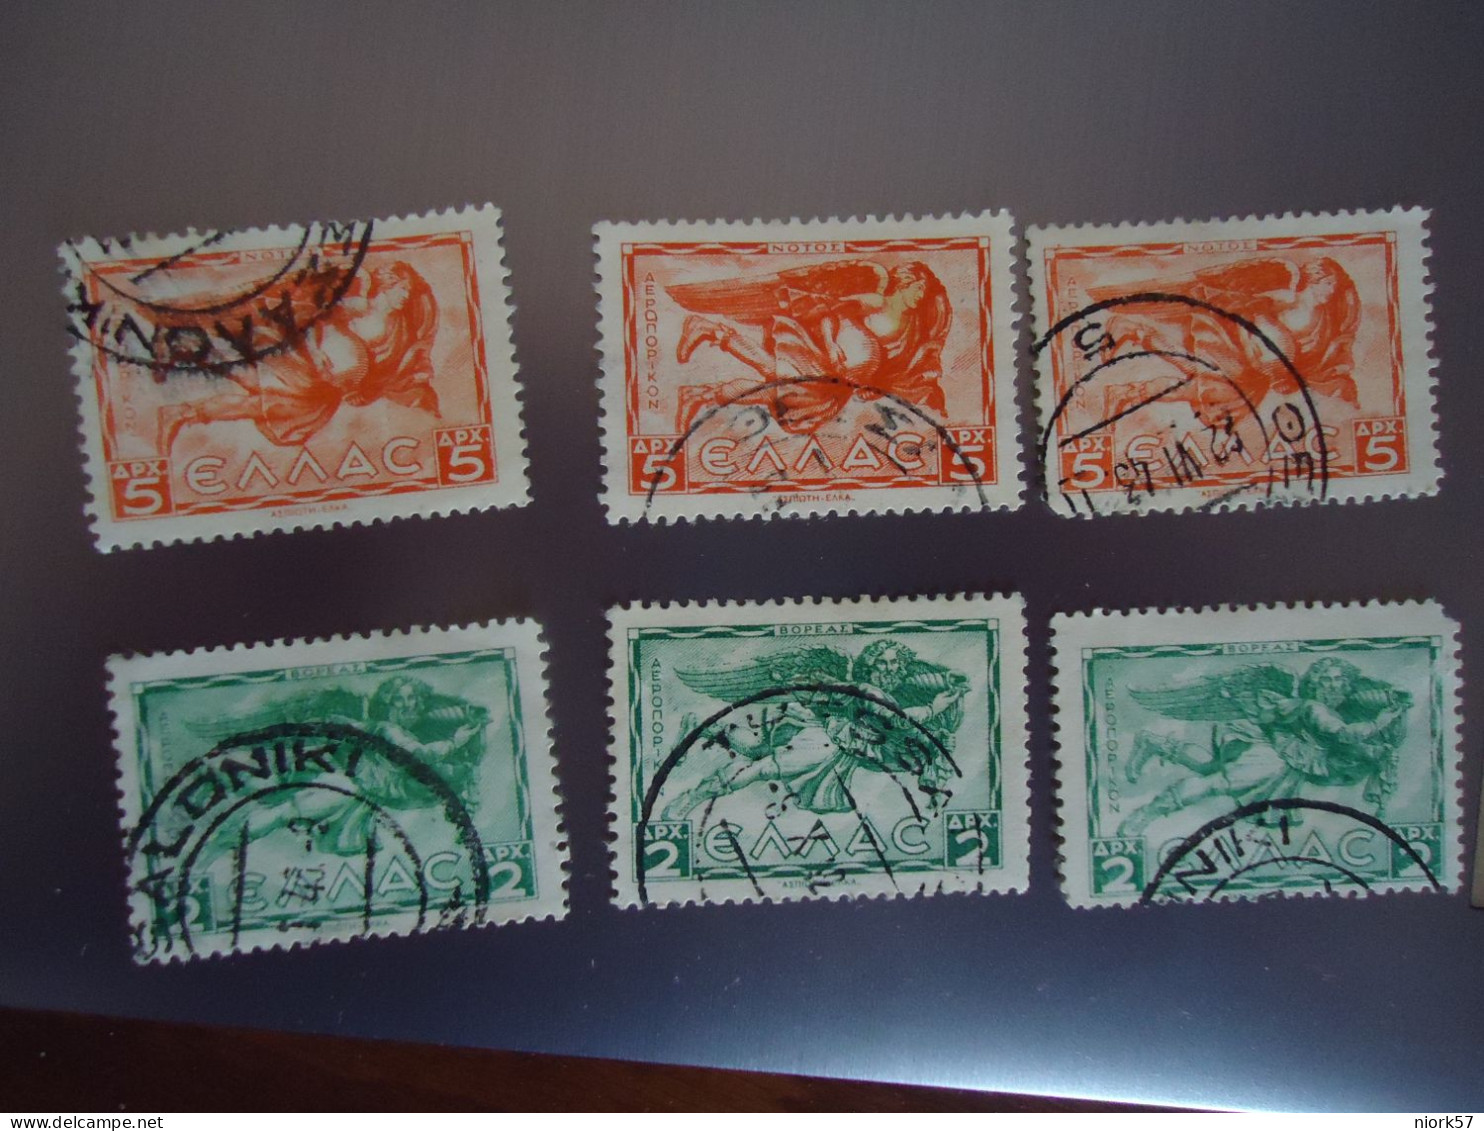 GREECE  USED  6 STAMPS  1942-  AIR WINDS - Timbres De Distributeurs [ATM]